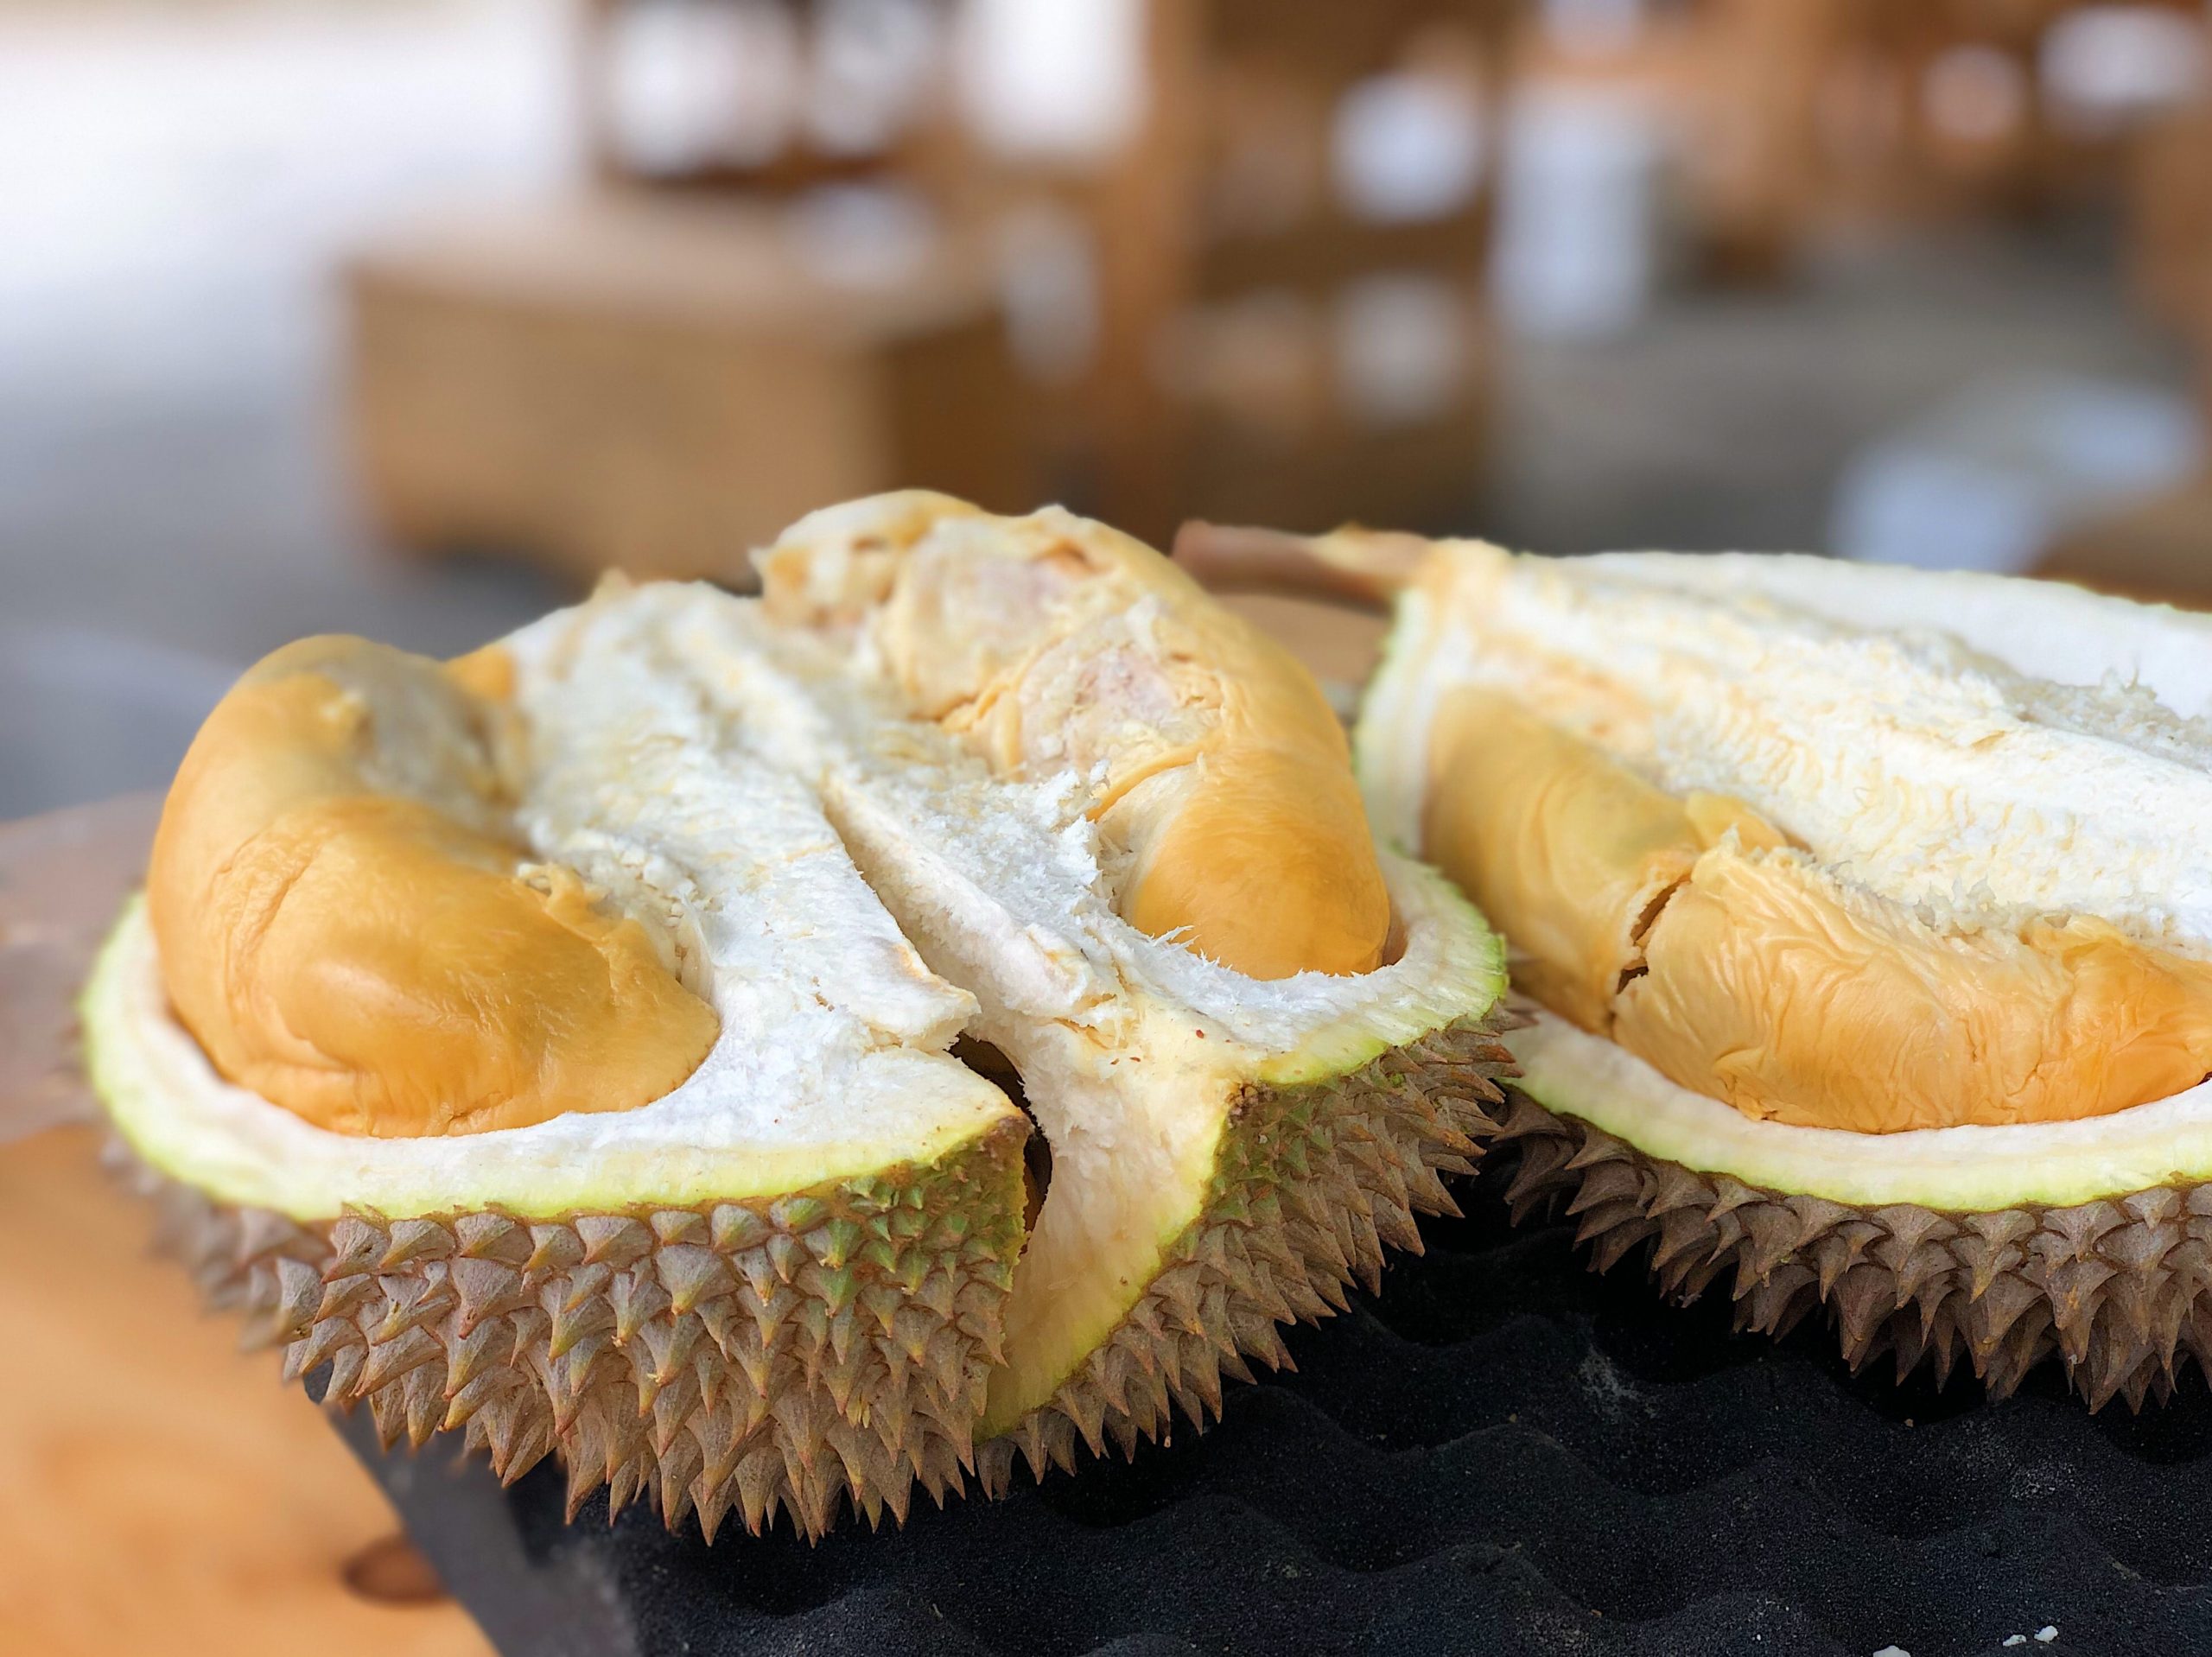 Thailand’s well-known fruit is promoted for tourism at the “Phuket Durian Fair.”